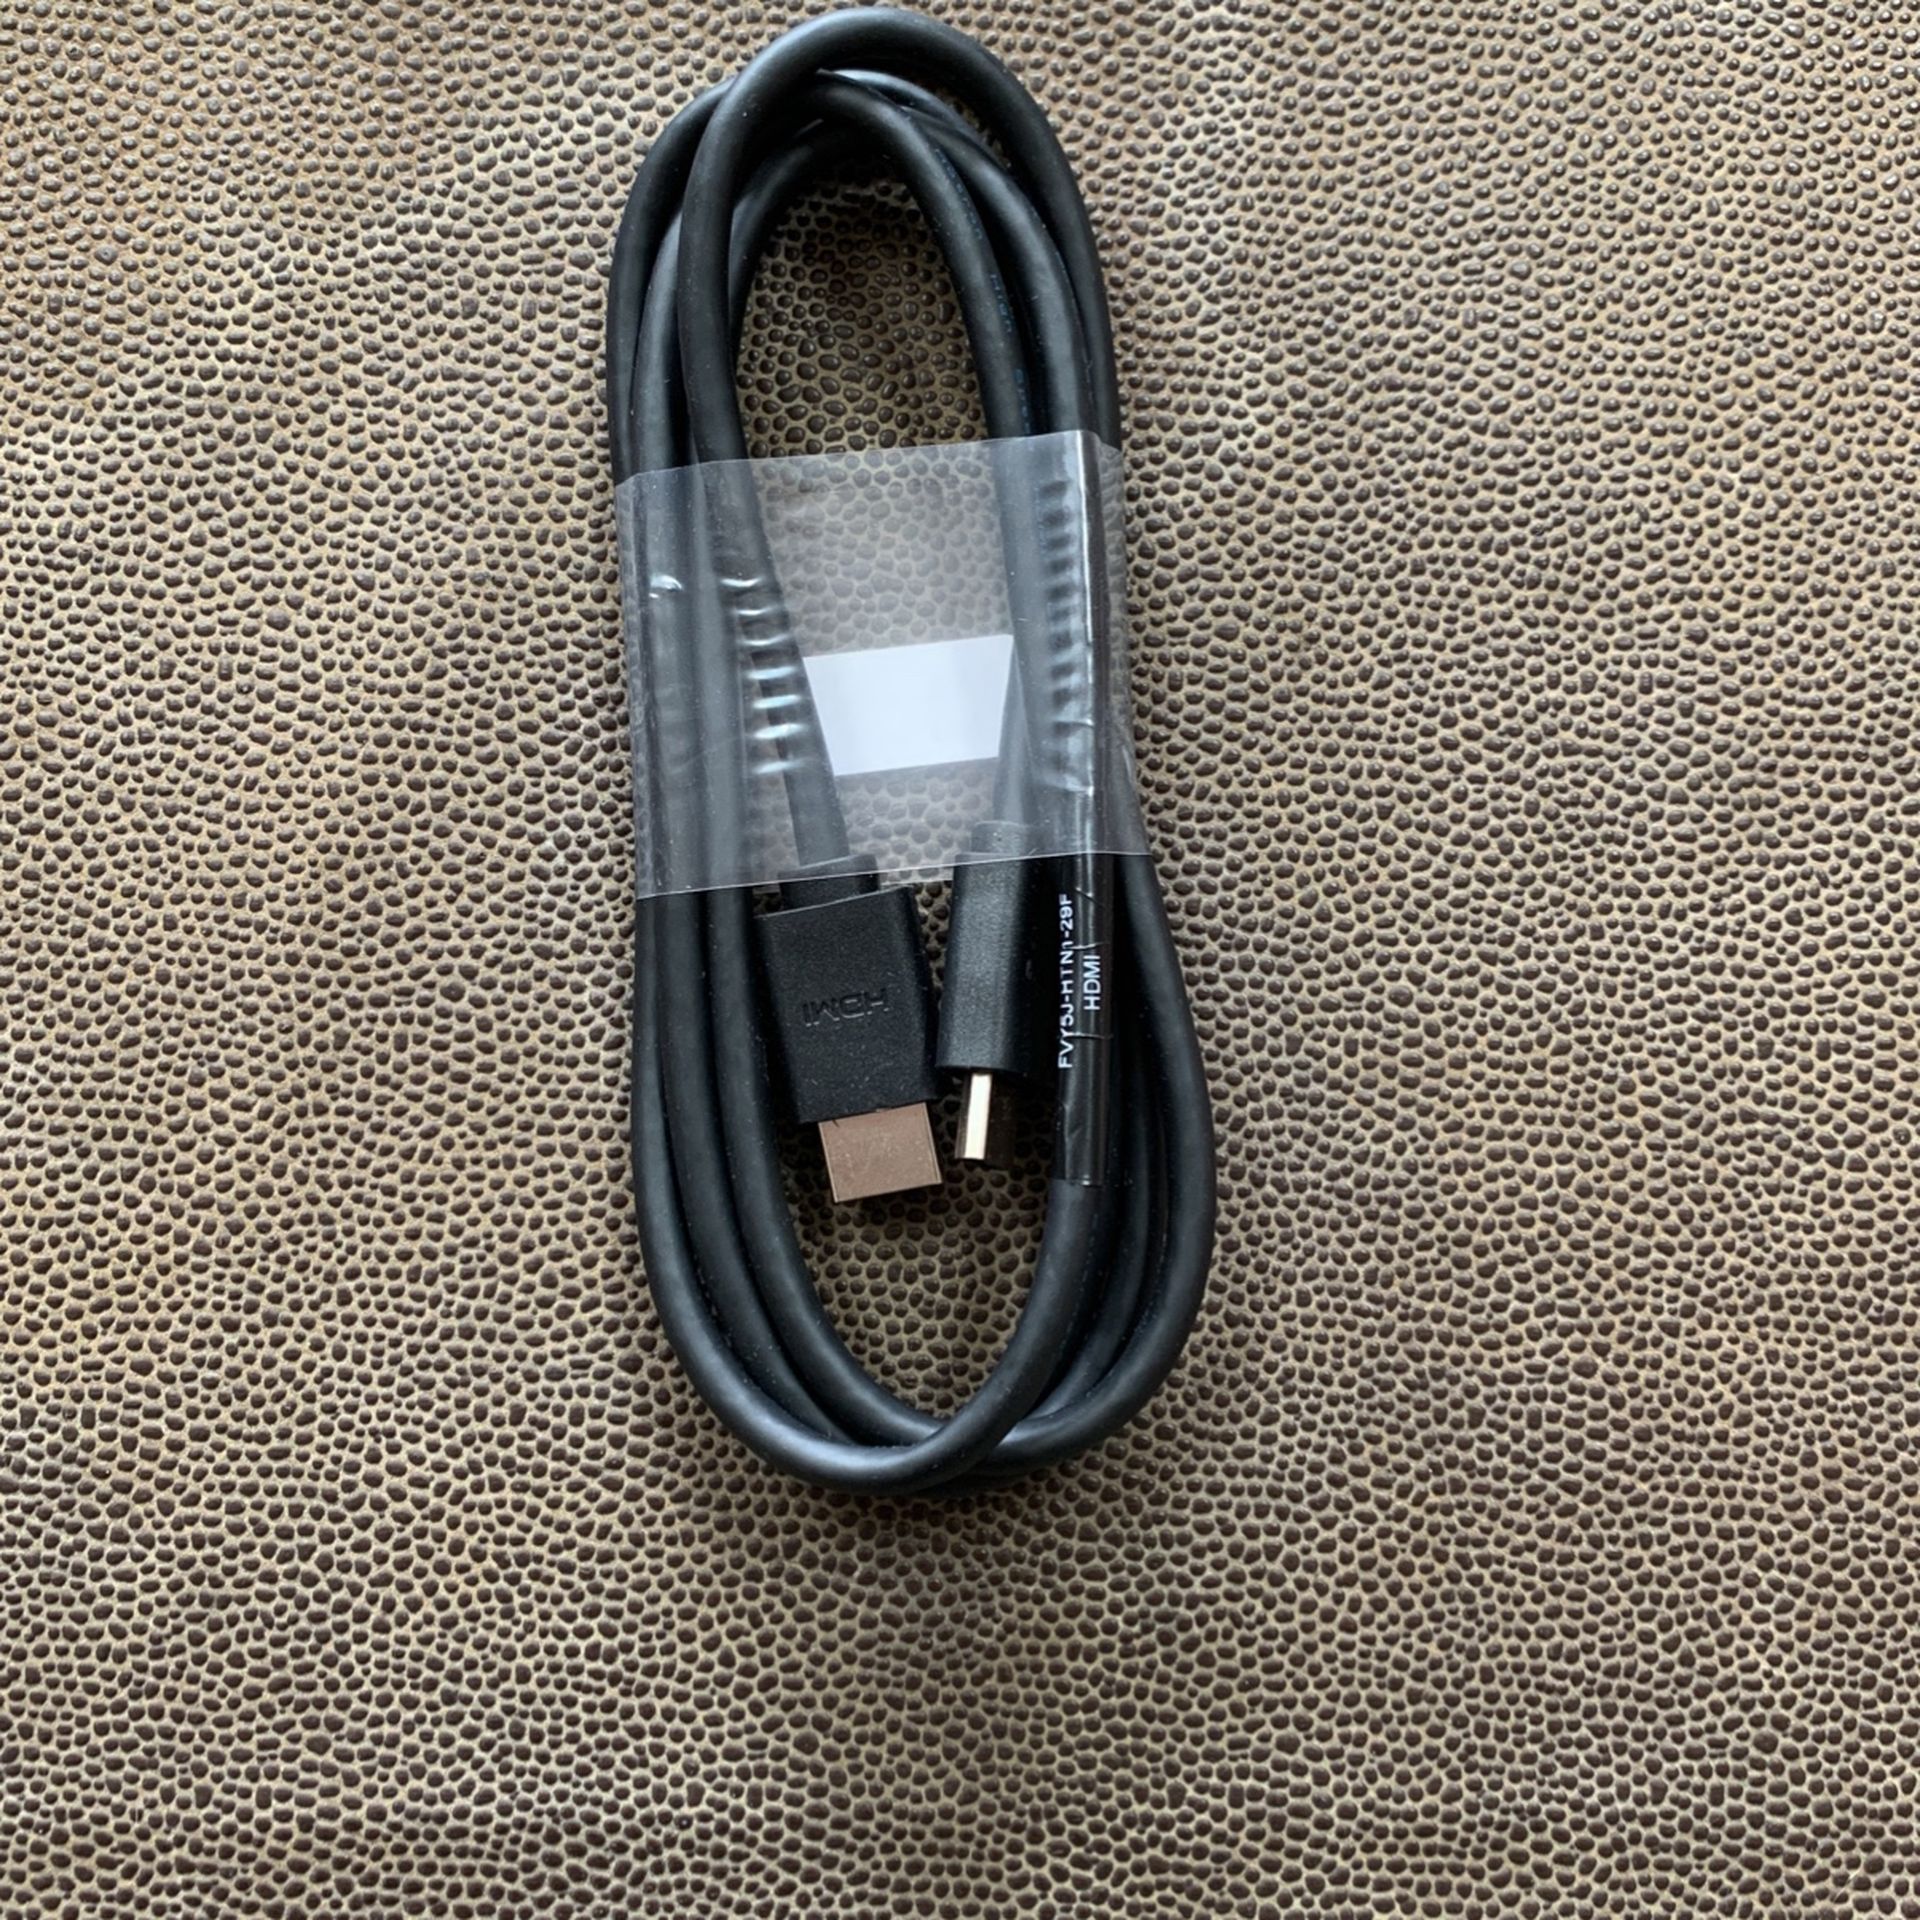 HDMI Cable - 5ft New